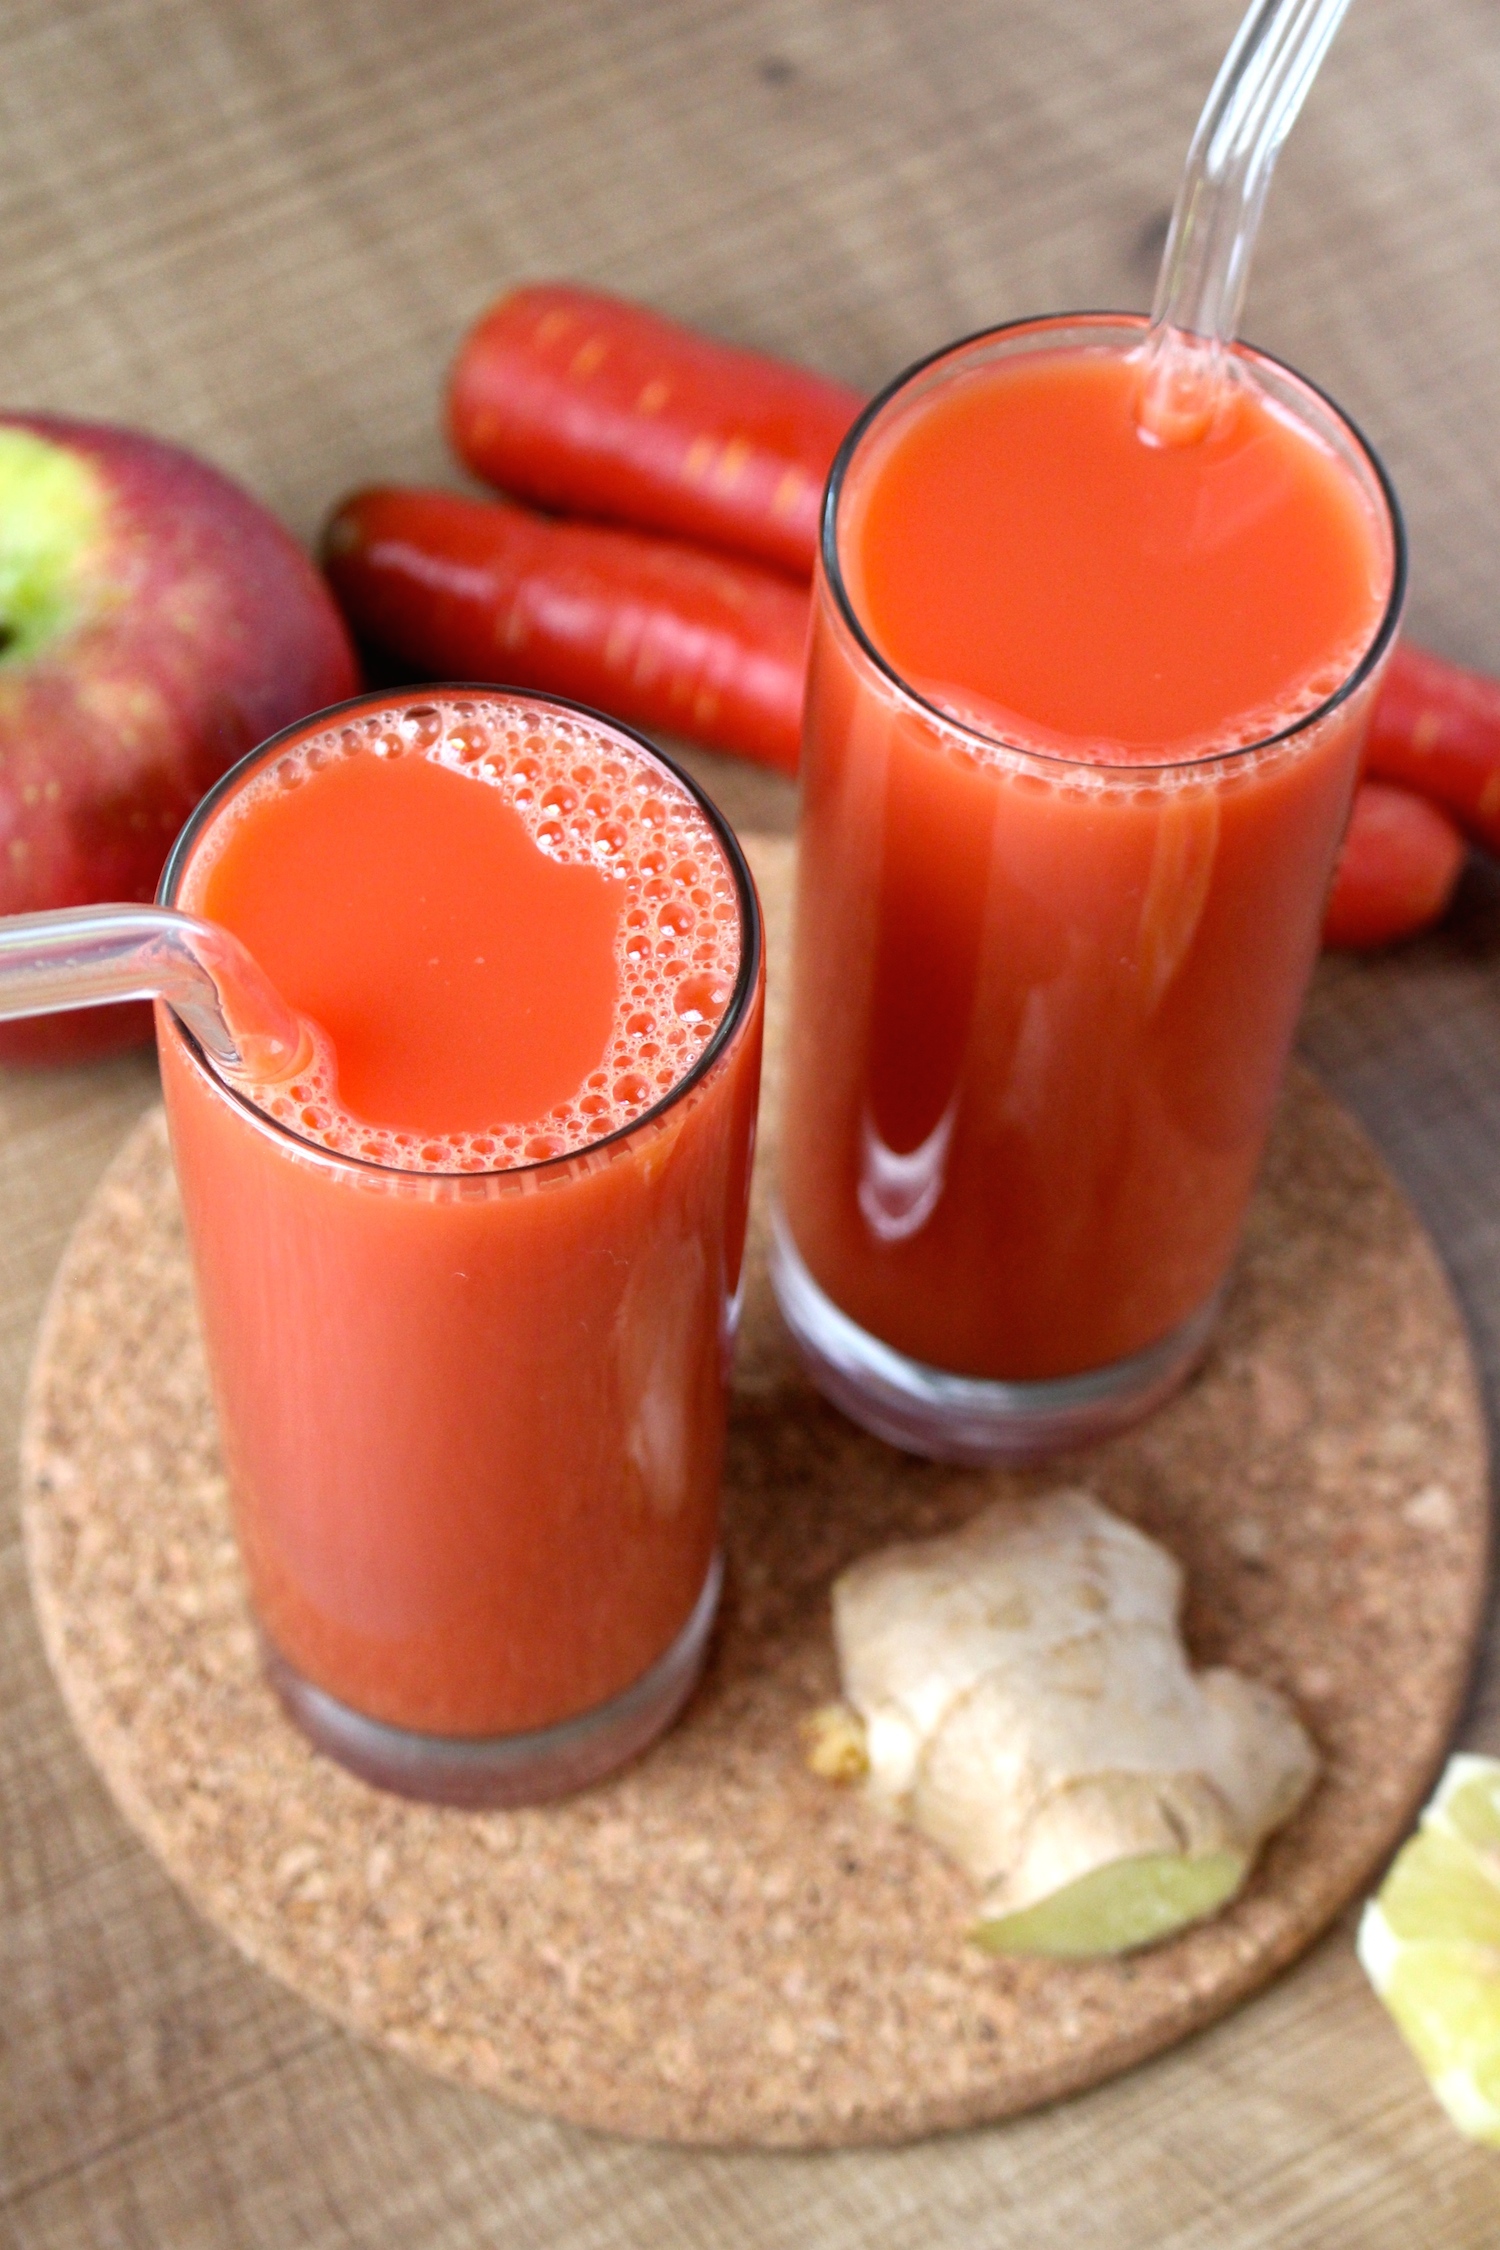 Apple, Carrot, and Ginger Juice using a Blender